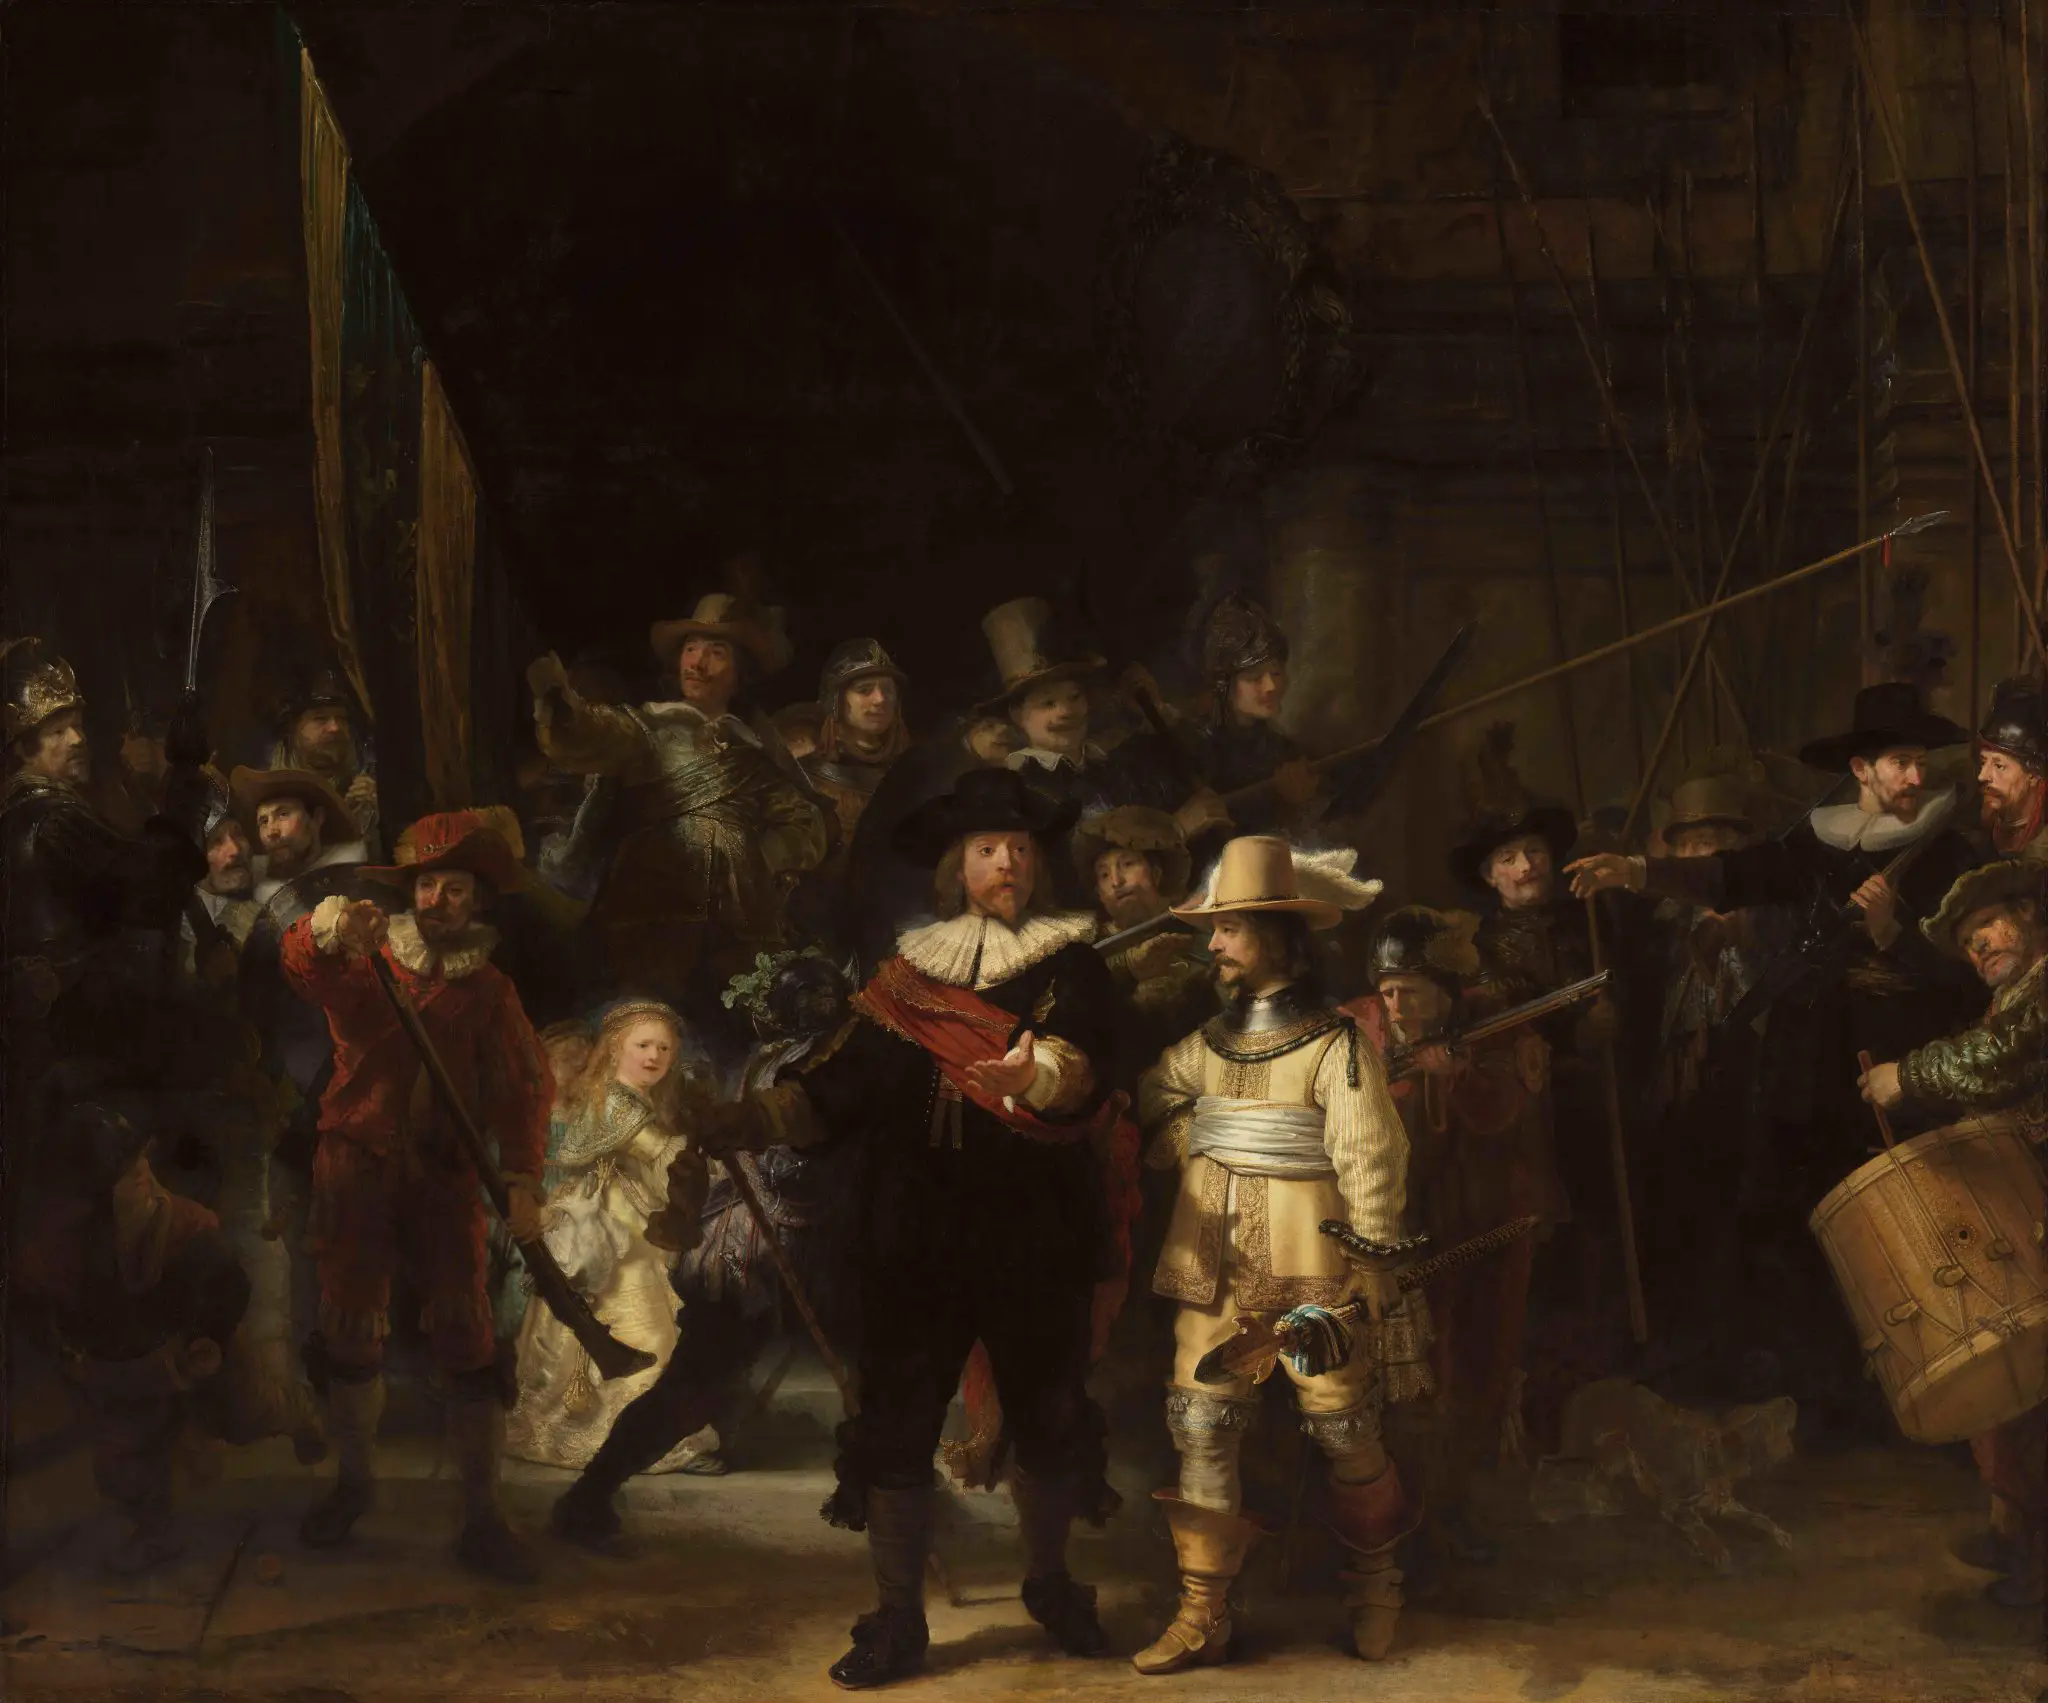 Scientists Uncover New Secrets of Rembrandt’s Famous Painting “The Night Watch”